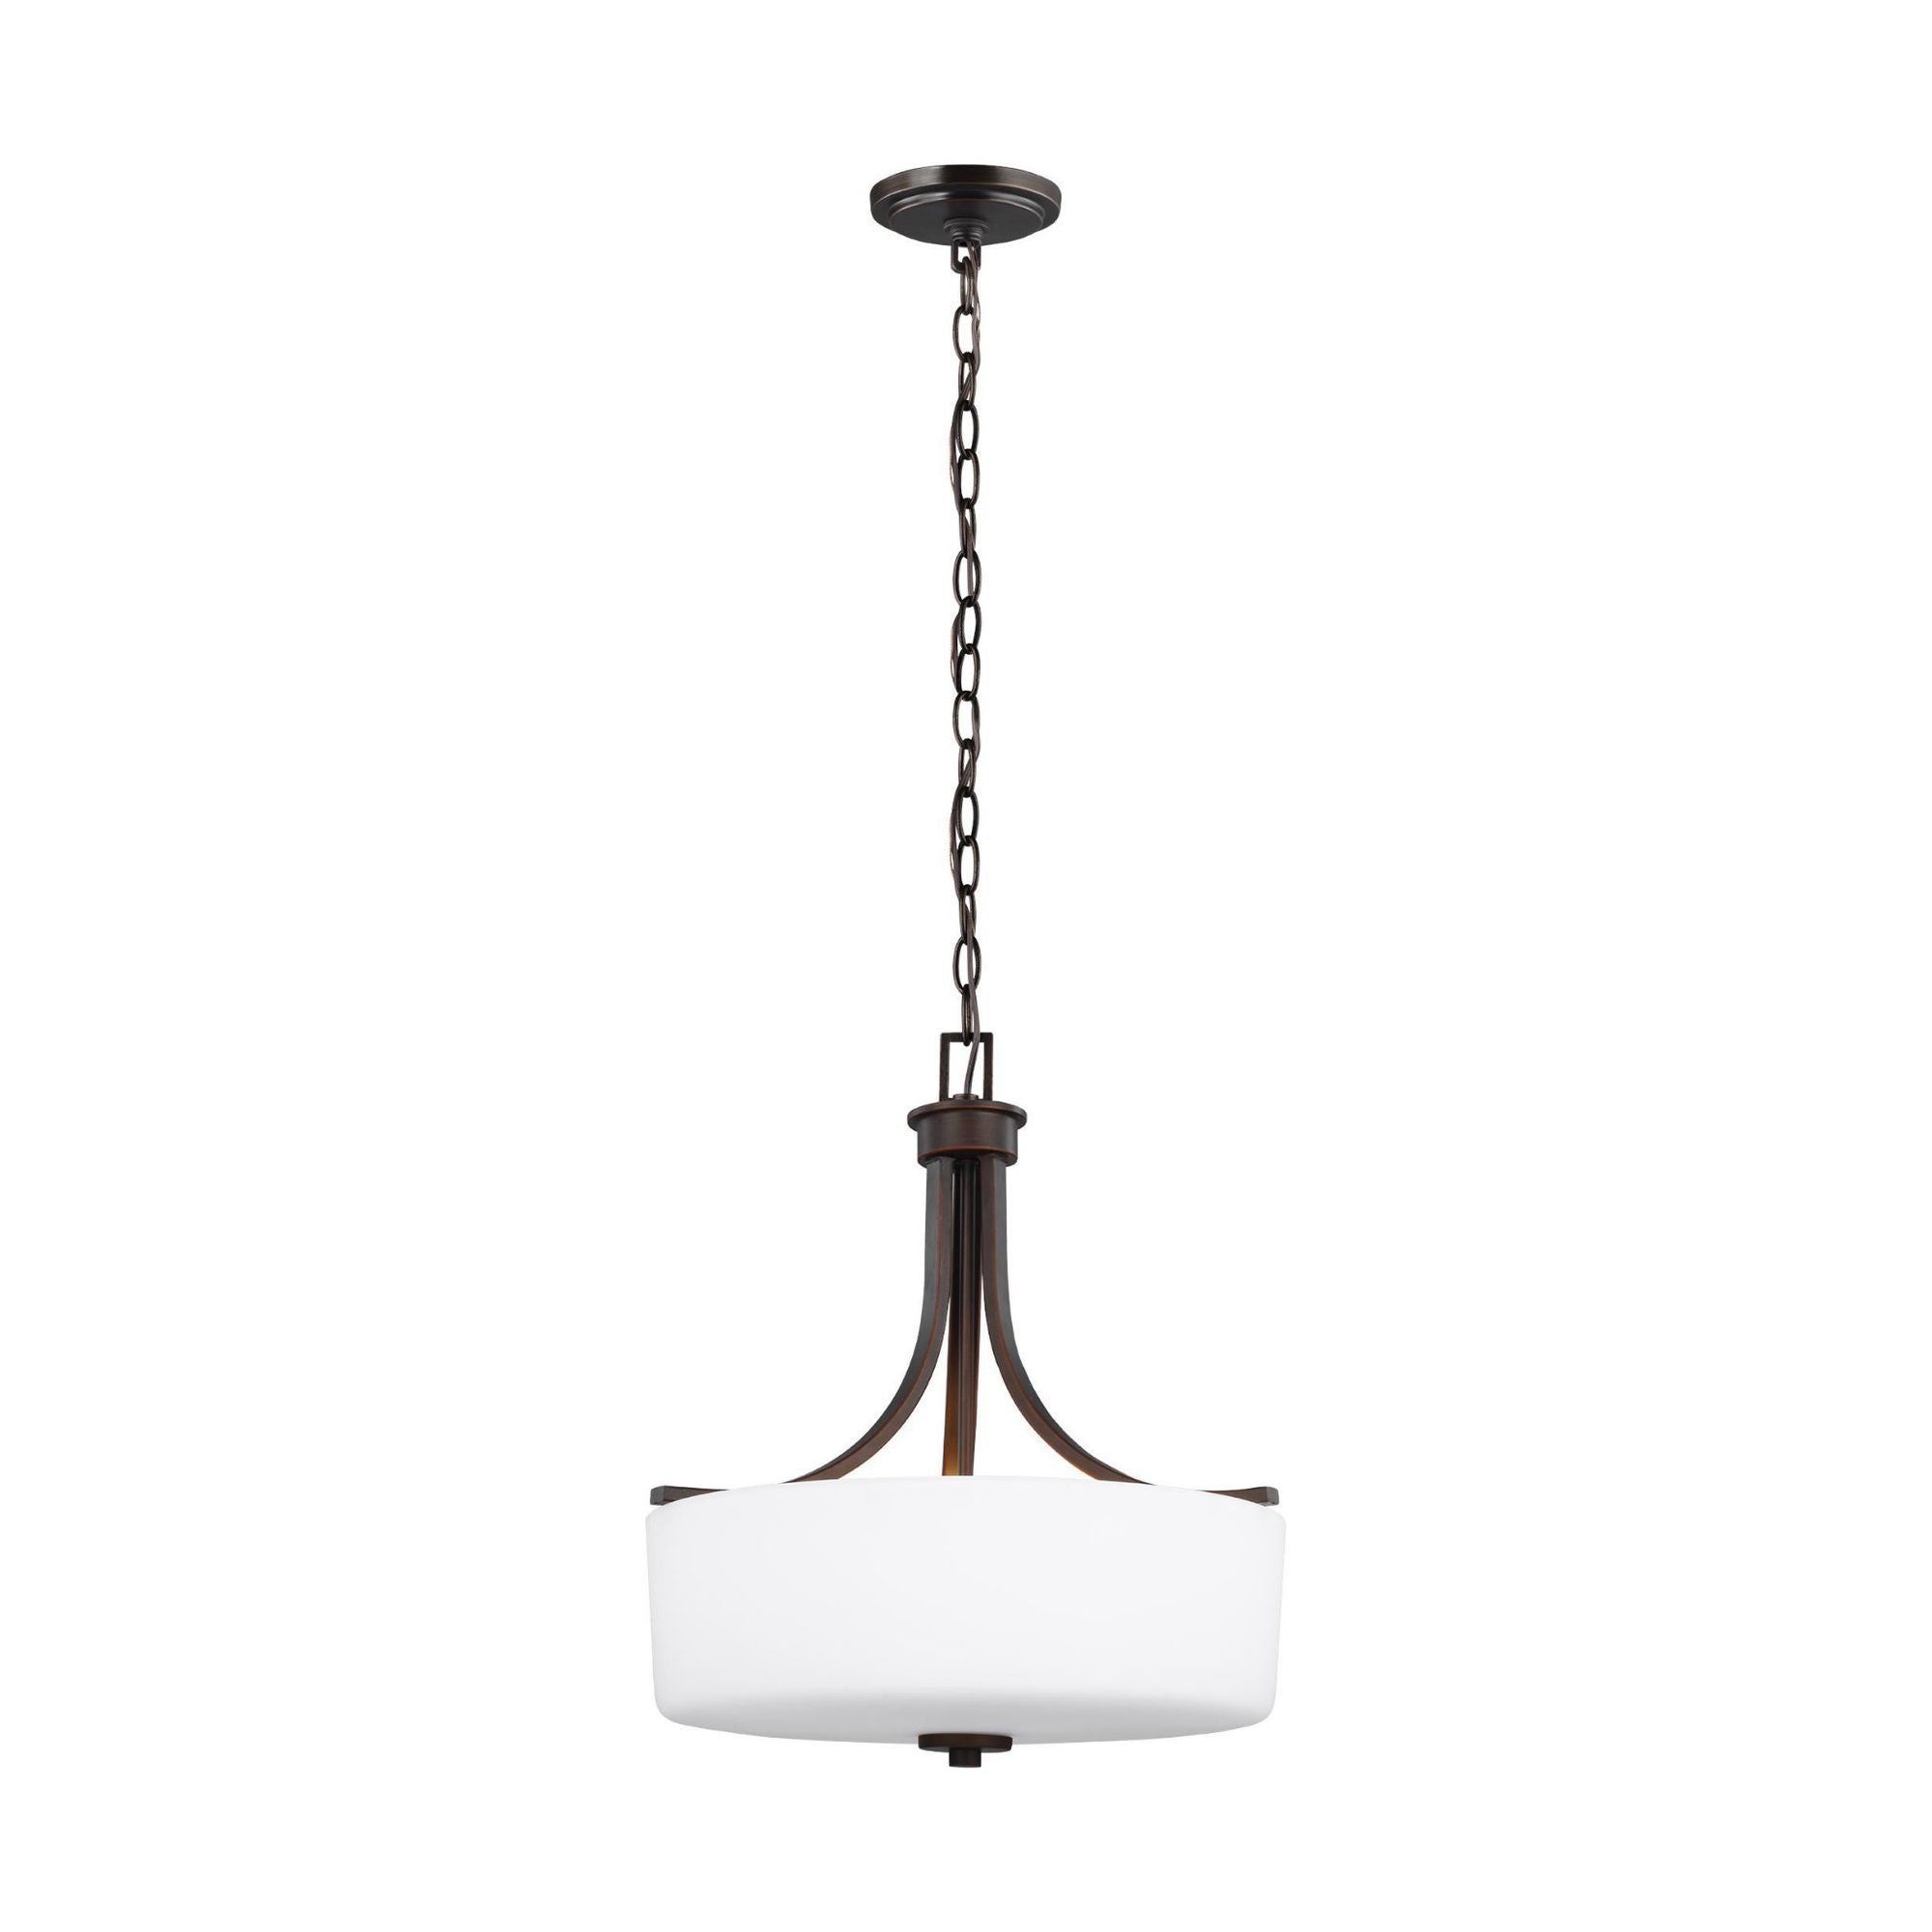 Canfield Three Light Pendant LED Modern 18.5" Height Steel Round Etched / White Inside Shade in Bronze